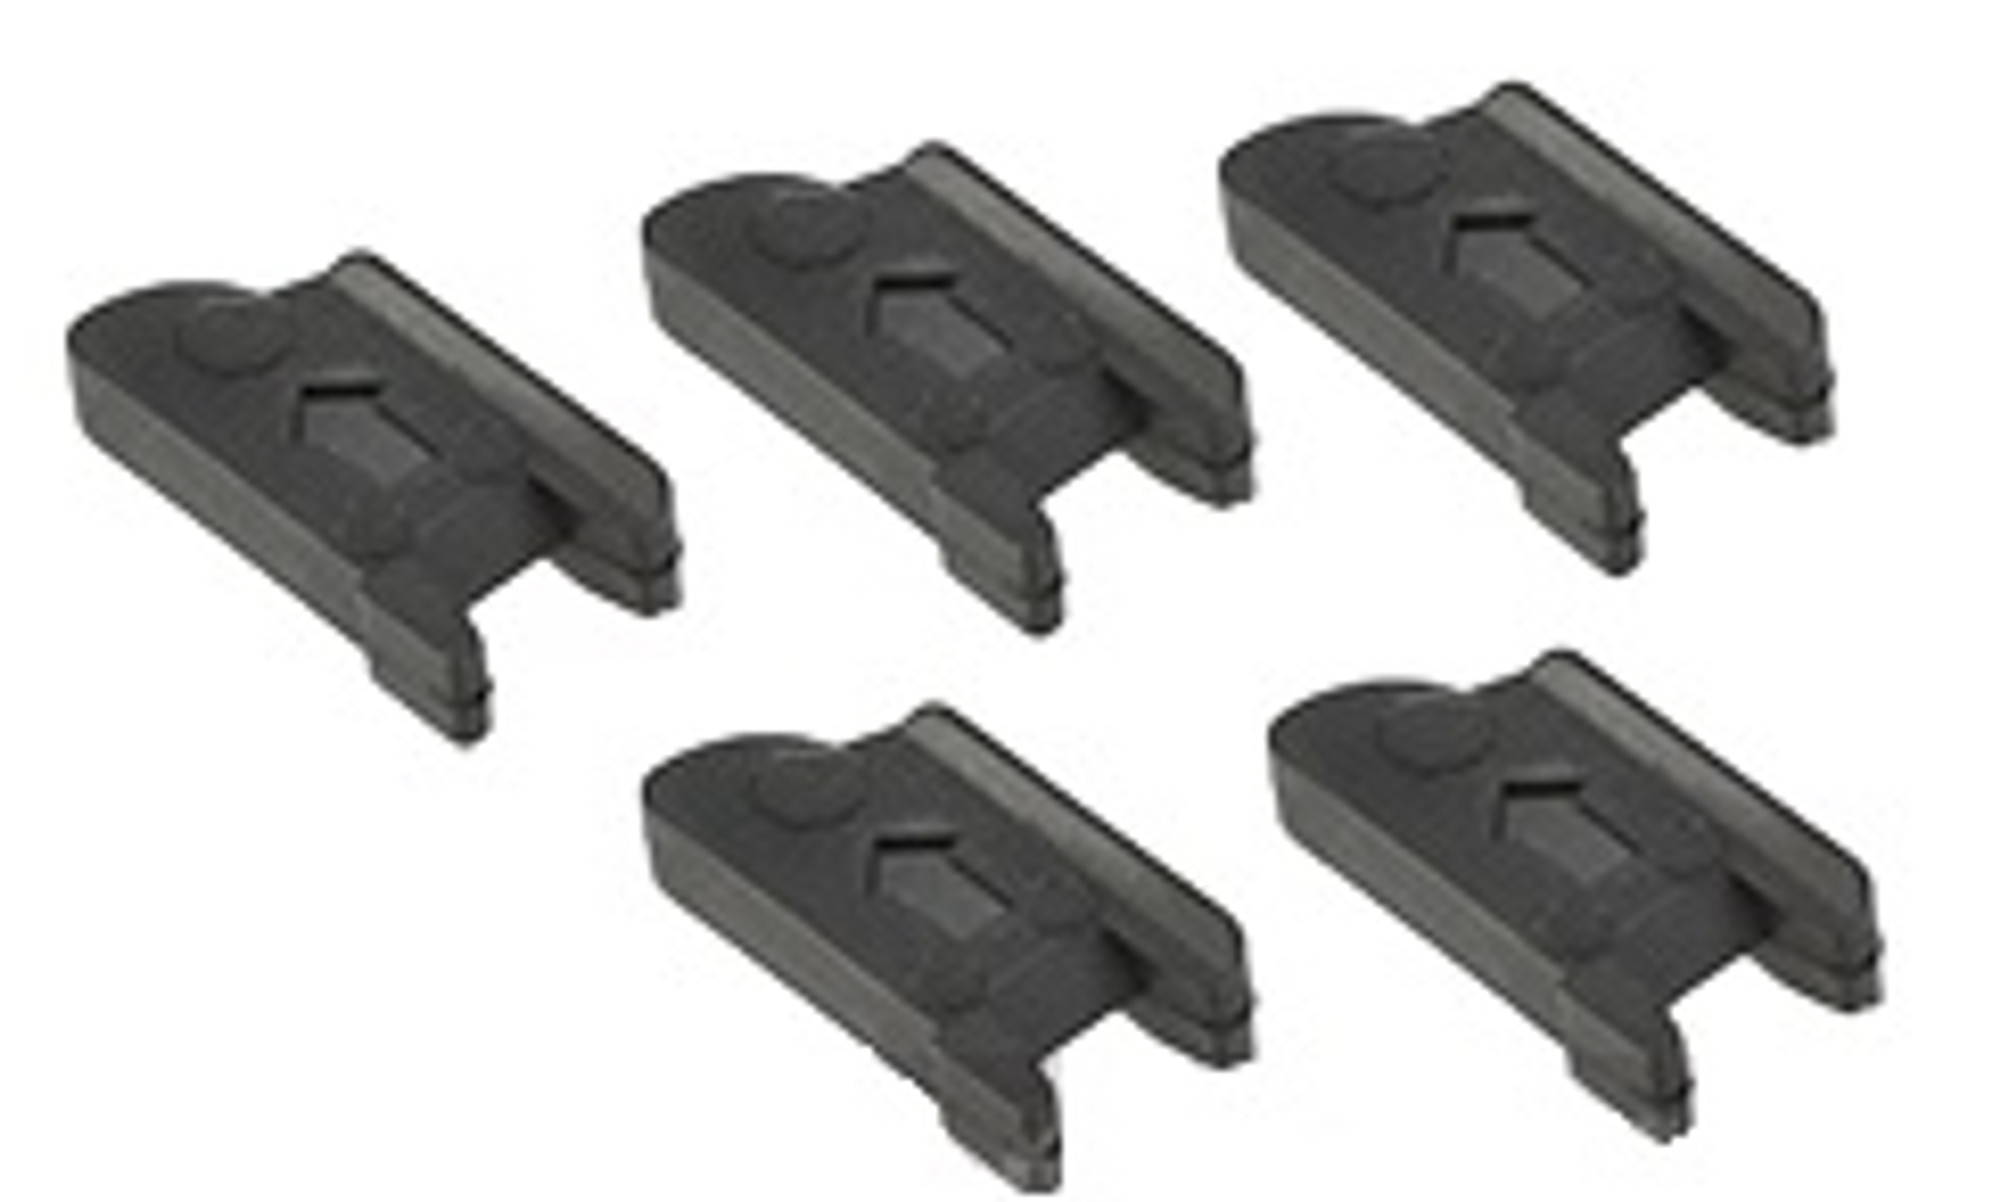 Guarder Gas Magazine Follower Blocks For Airsoft GBB Pistols - 5 Pack